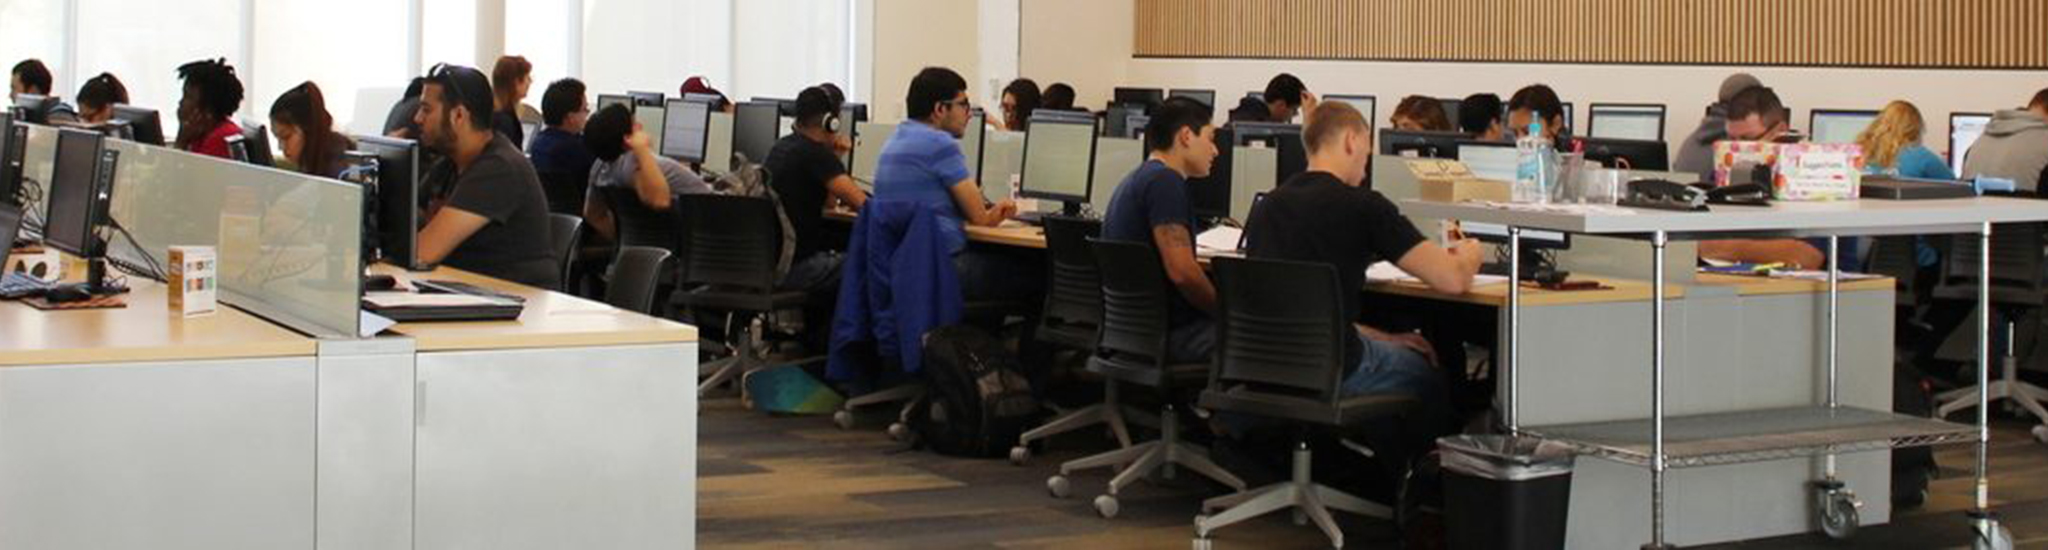 Students using computers in the HJLC computer lab.